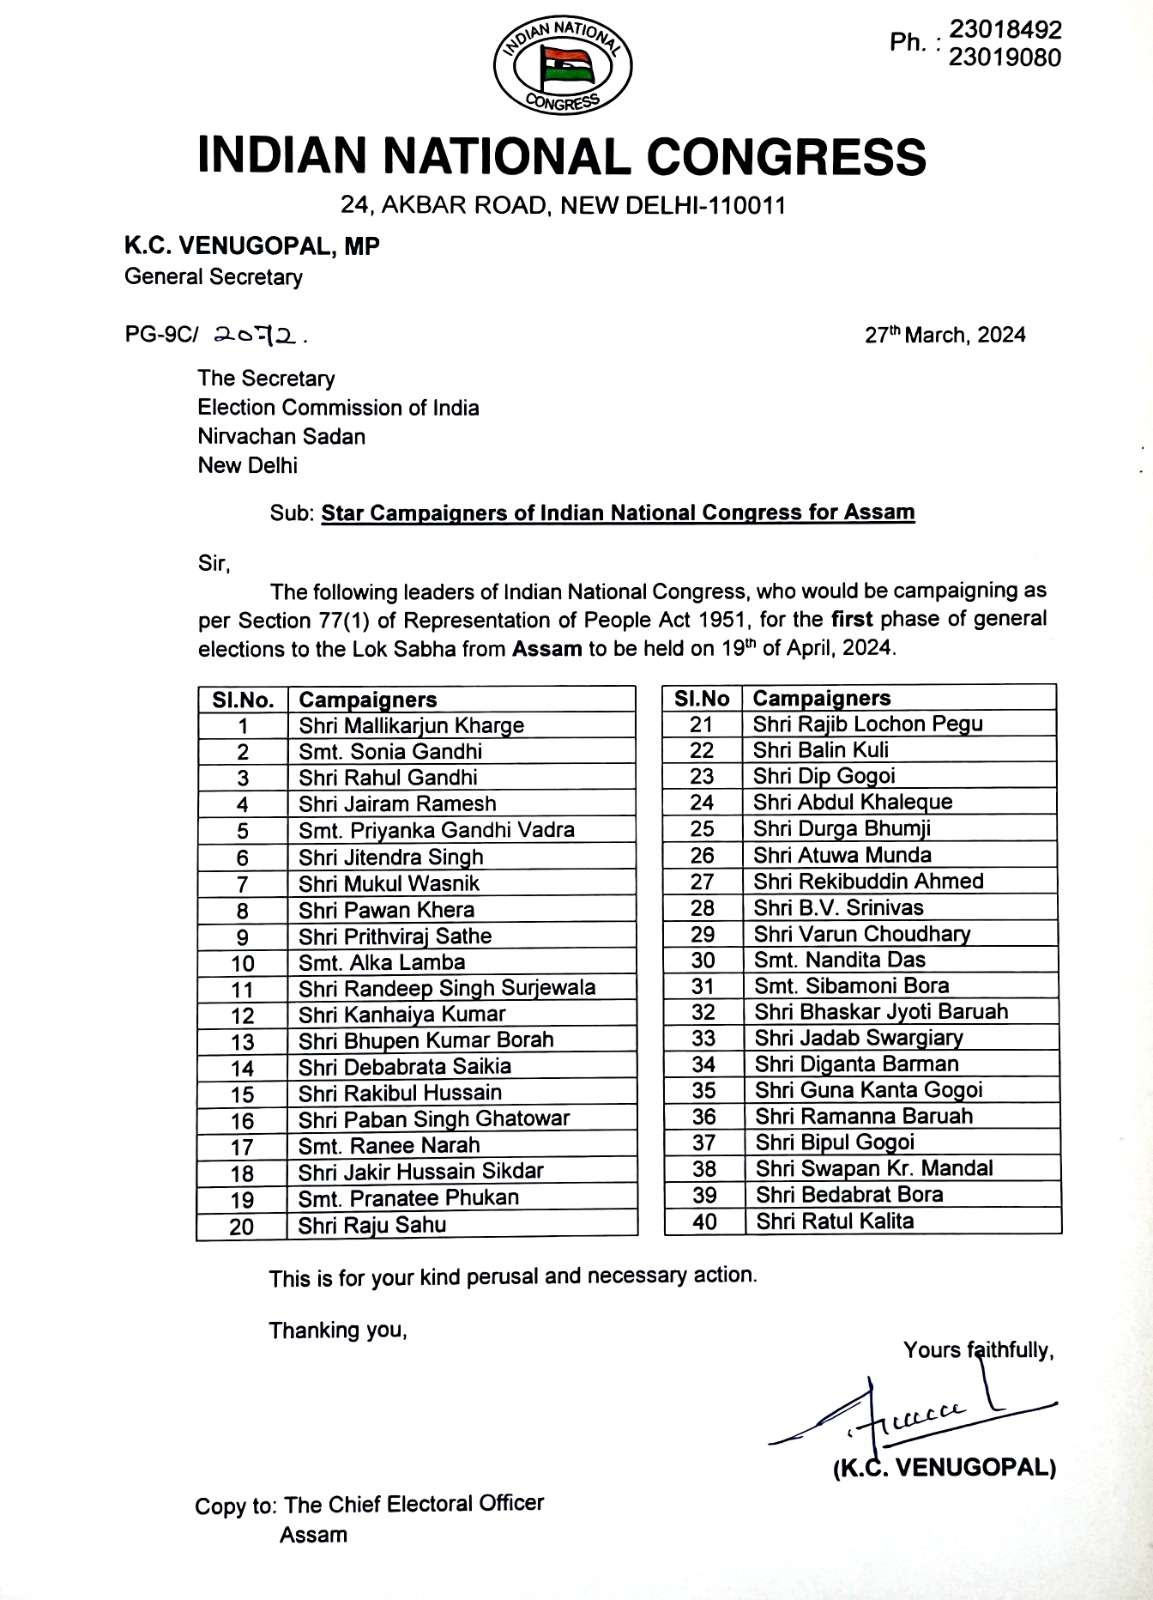 congress released list of star campaigner